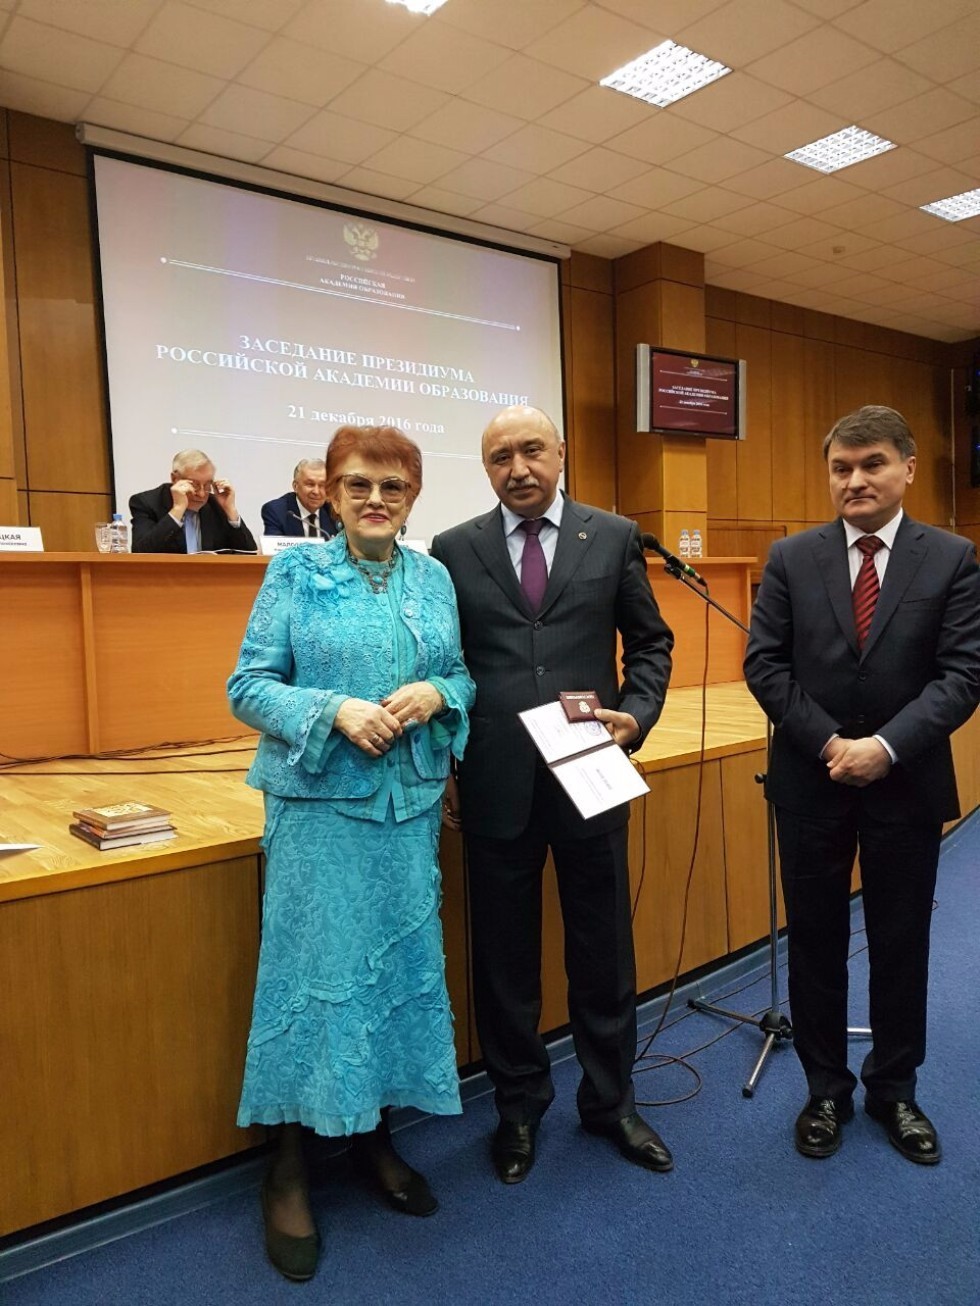 Rector Ilshat Gafurov Received Credentials of a Corresponding Member of the Russian Academy of Education ,Russian Academy of Education, Russian Psychological Society